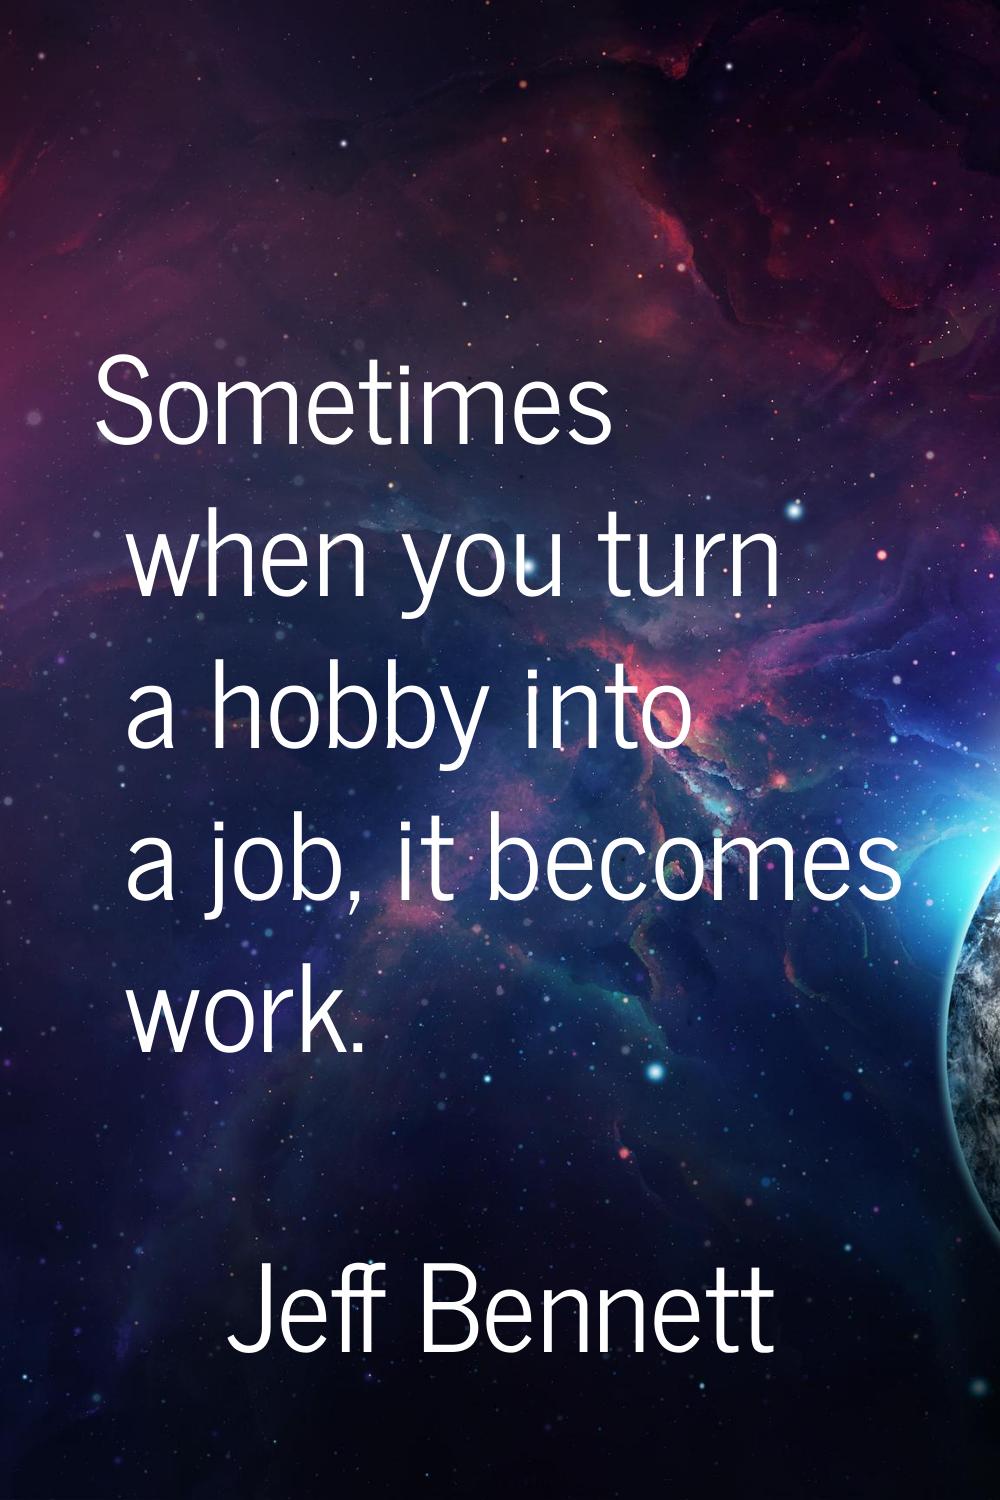 Sometimes when you turn a hobby into a job, it becomes work.